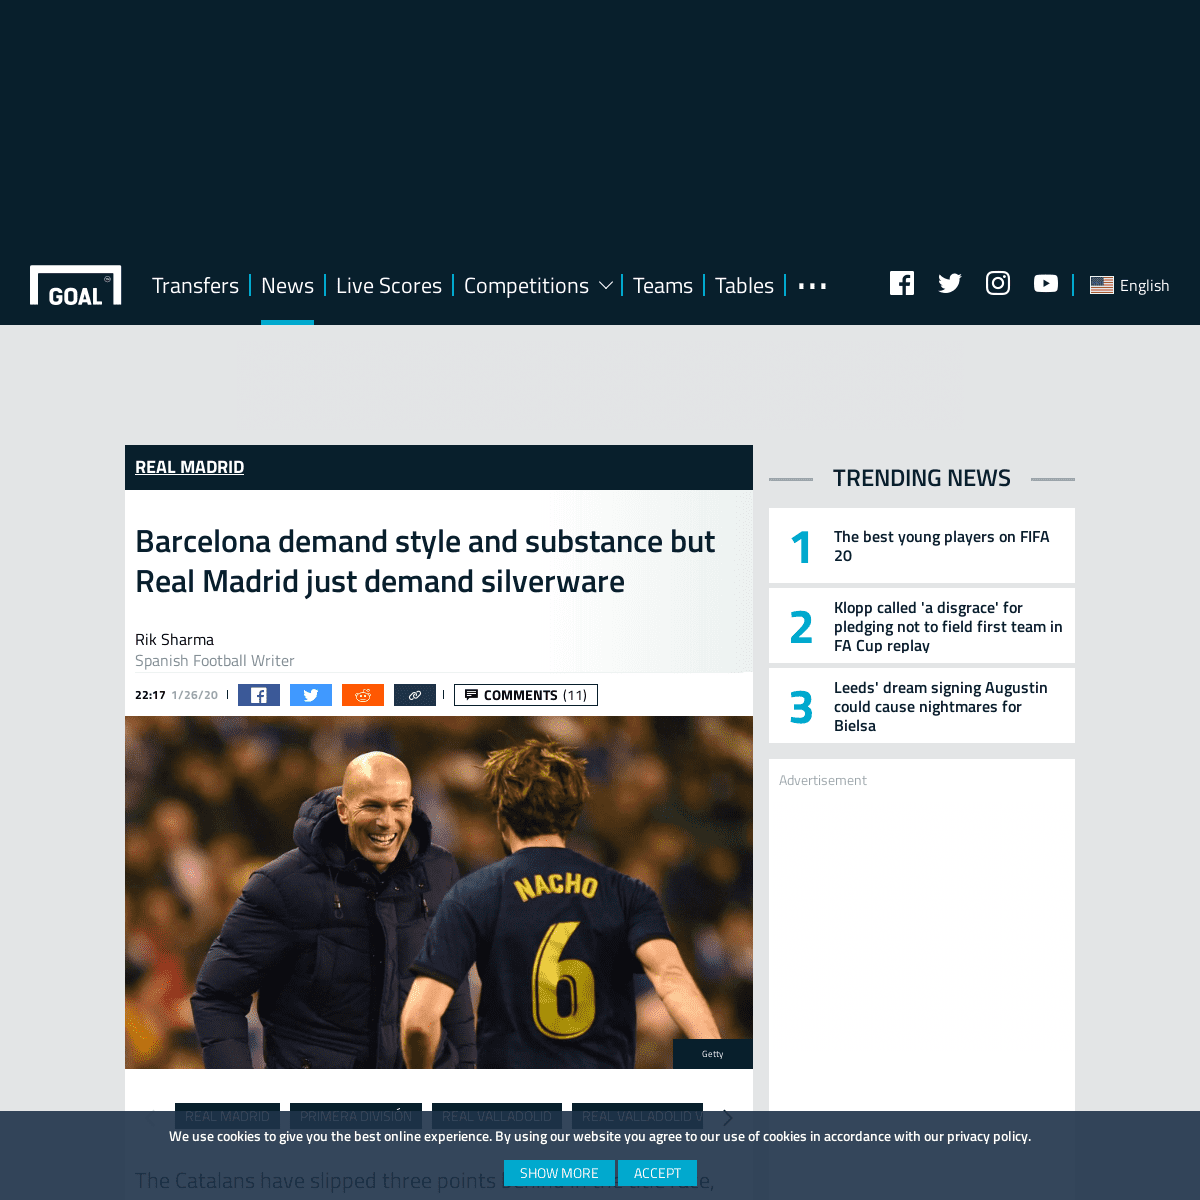 A complete backup of www.goal.com/en-us/news/barcelona-demand-style-and-substance-but-real-madrid-just-demand-/1jtlv36m15f9a15p4